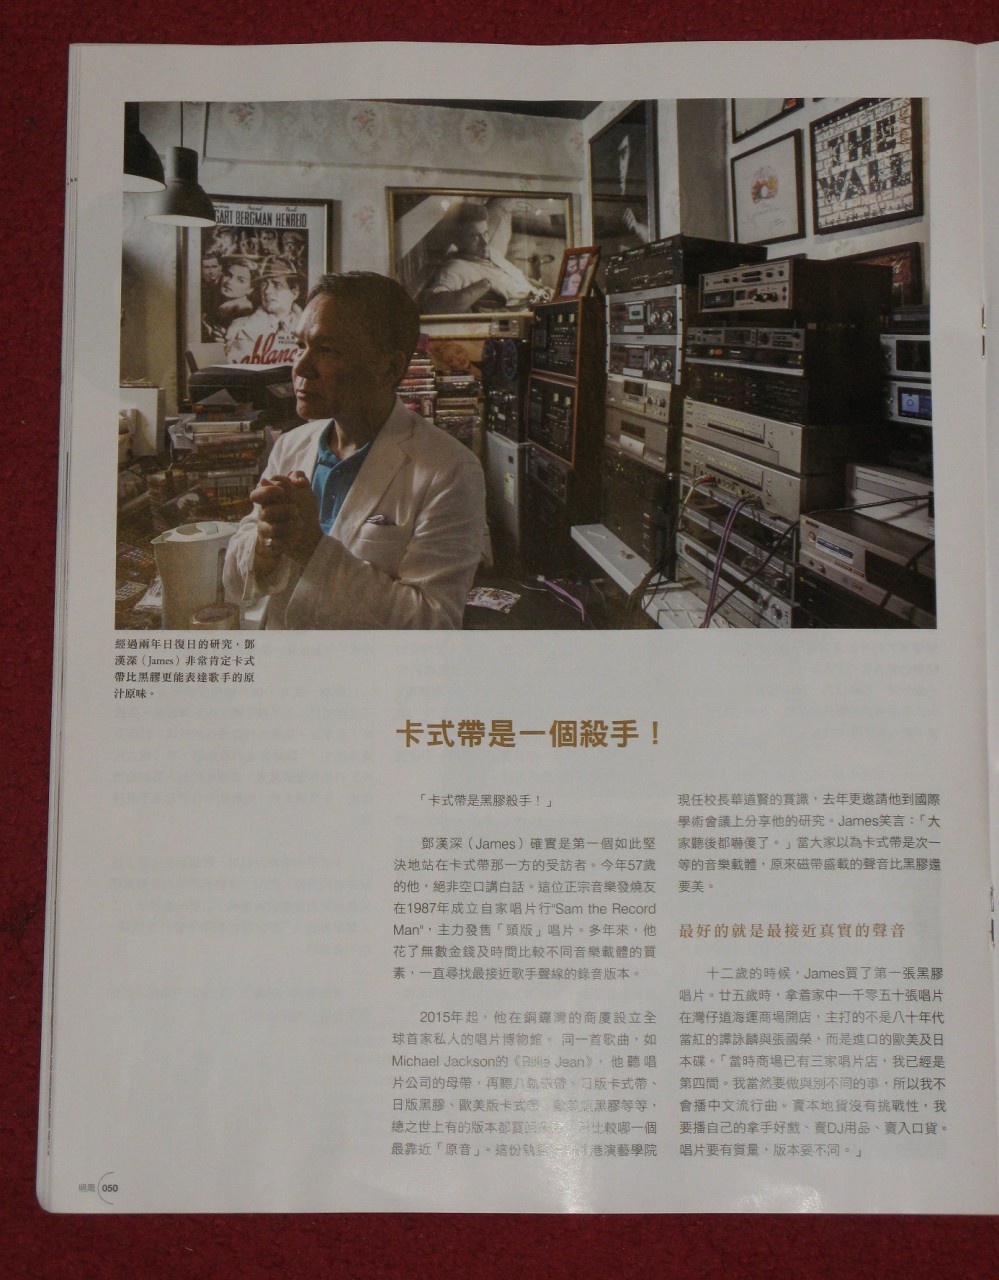 Ming Pao Weekly Interview